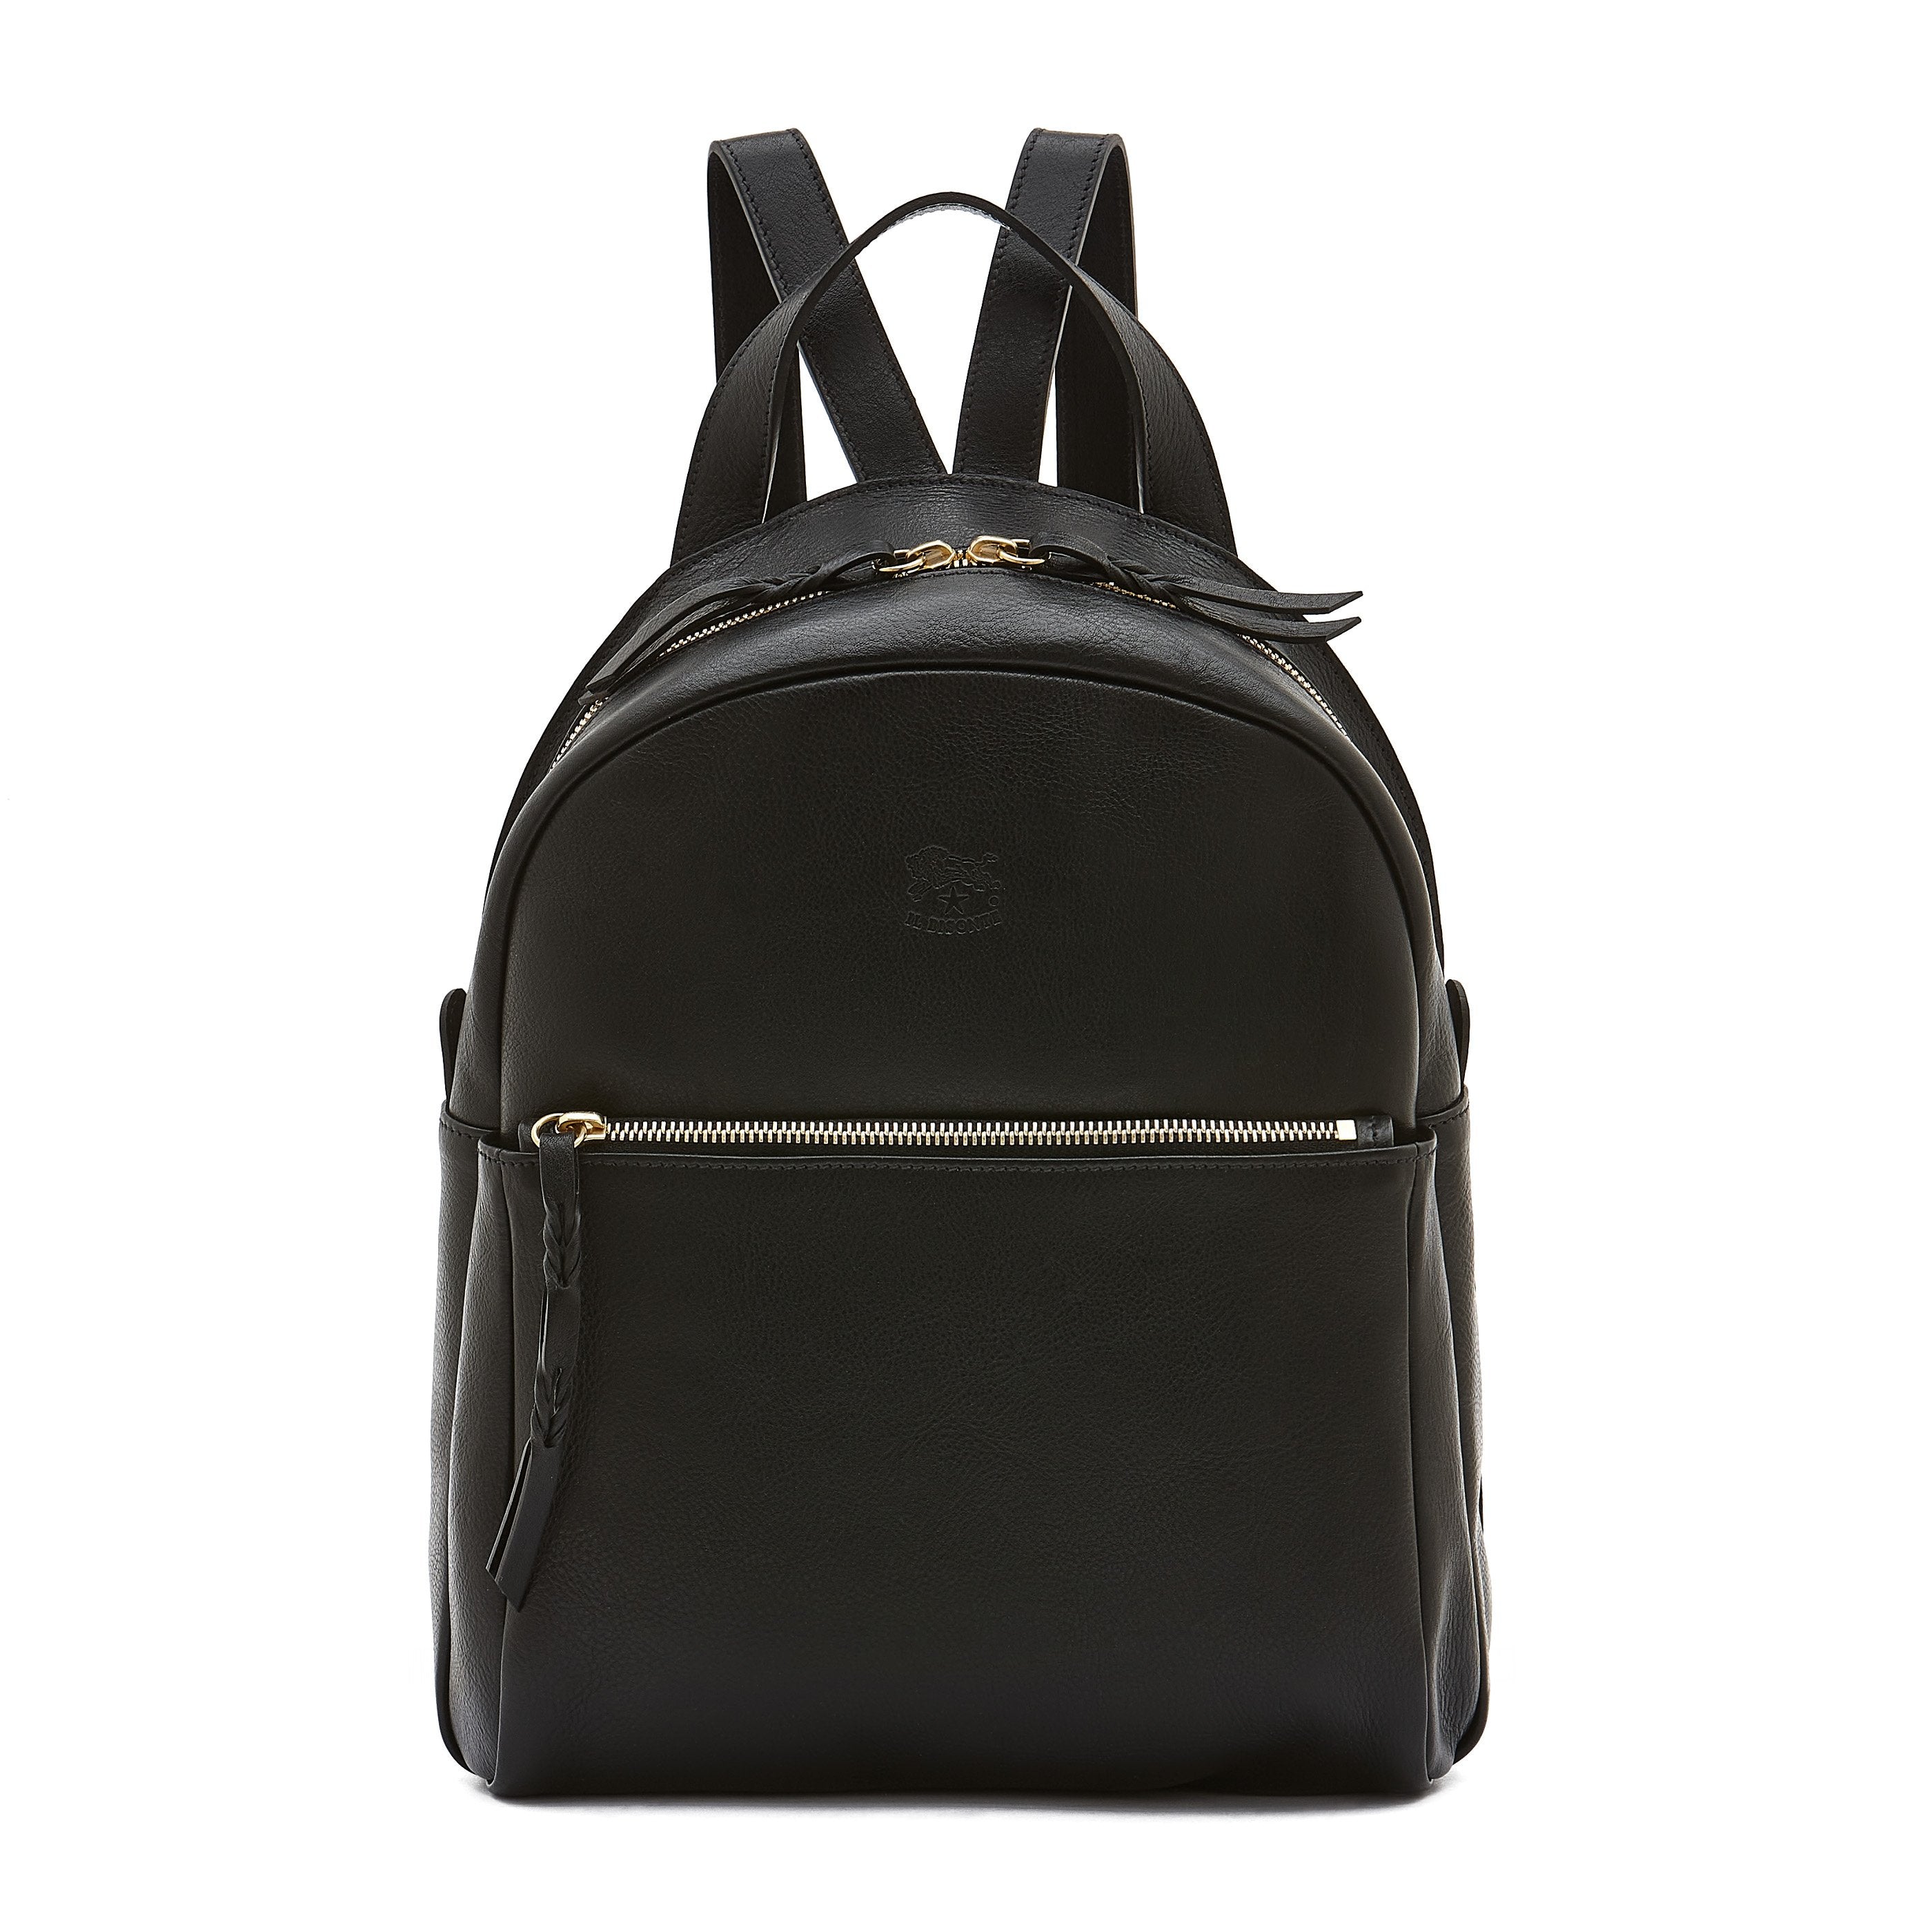 Leather Backpack Black color Made in Italy